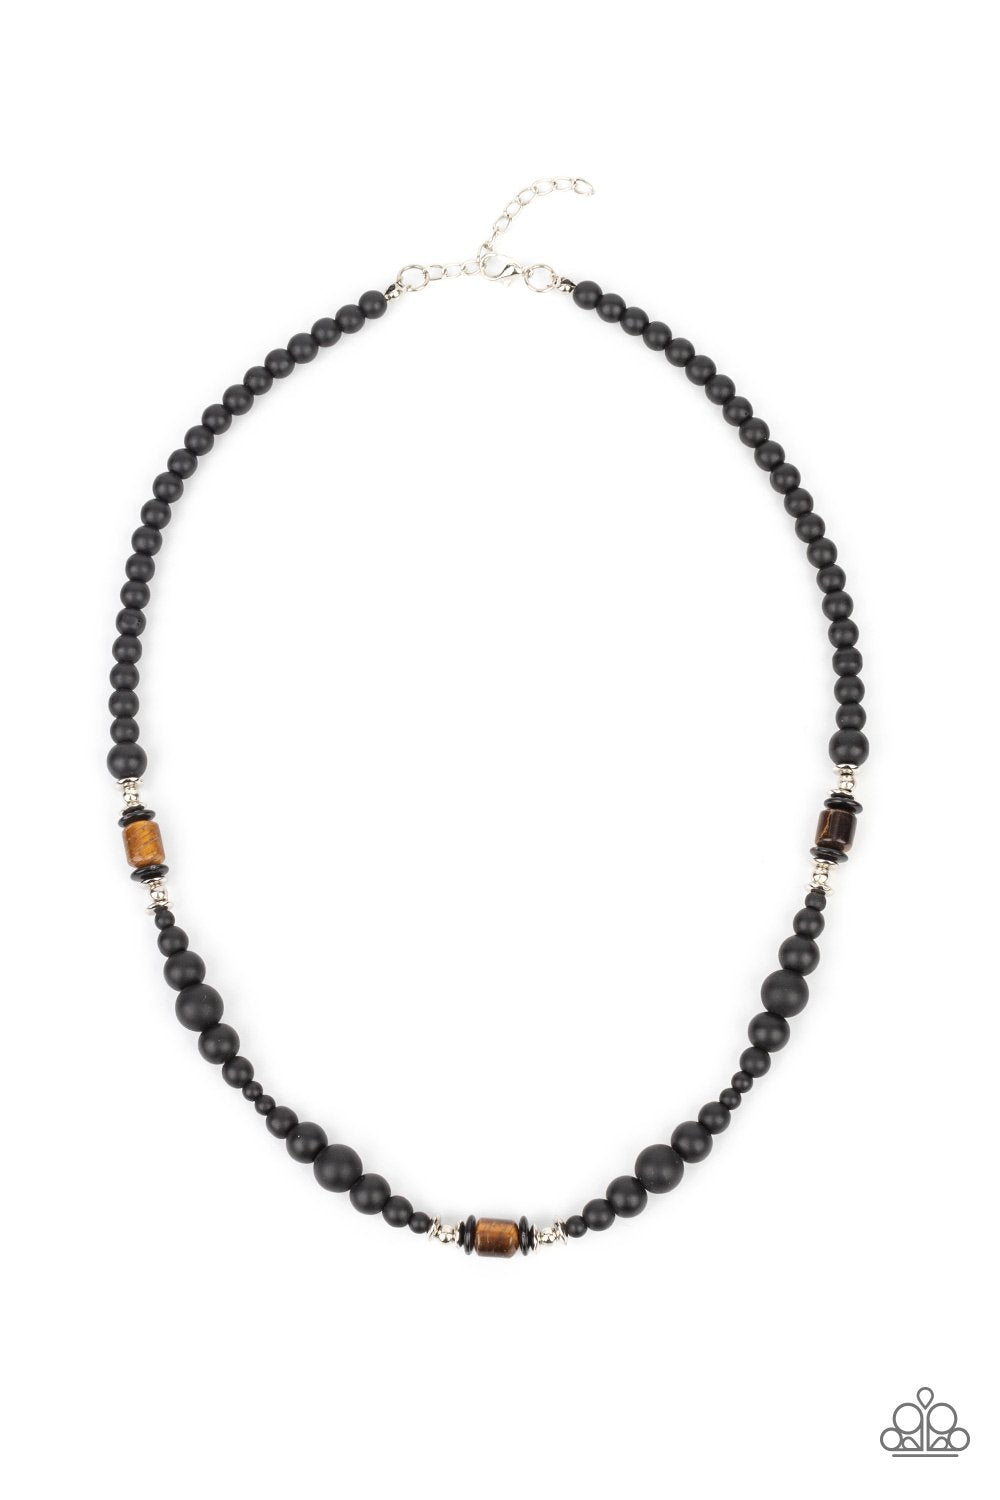 Stone Synchrony Men's Brown Tiger's Eye and Black Stone Urban Necklace - Paparazzi Accessories 2021 Convention Exclusive- lightbox - CarasShop.com - $5 Jewelry by Cara Jewels